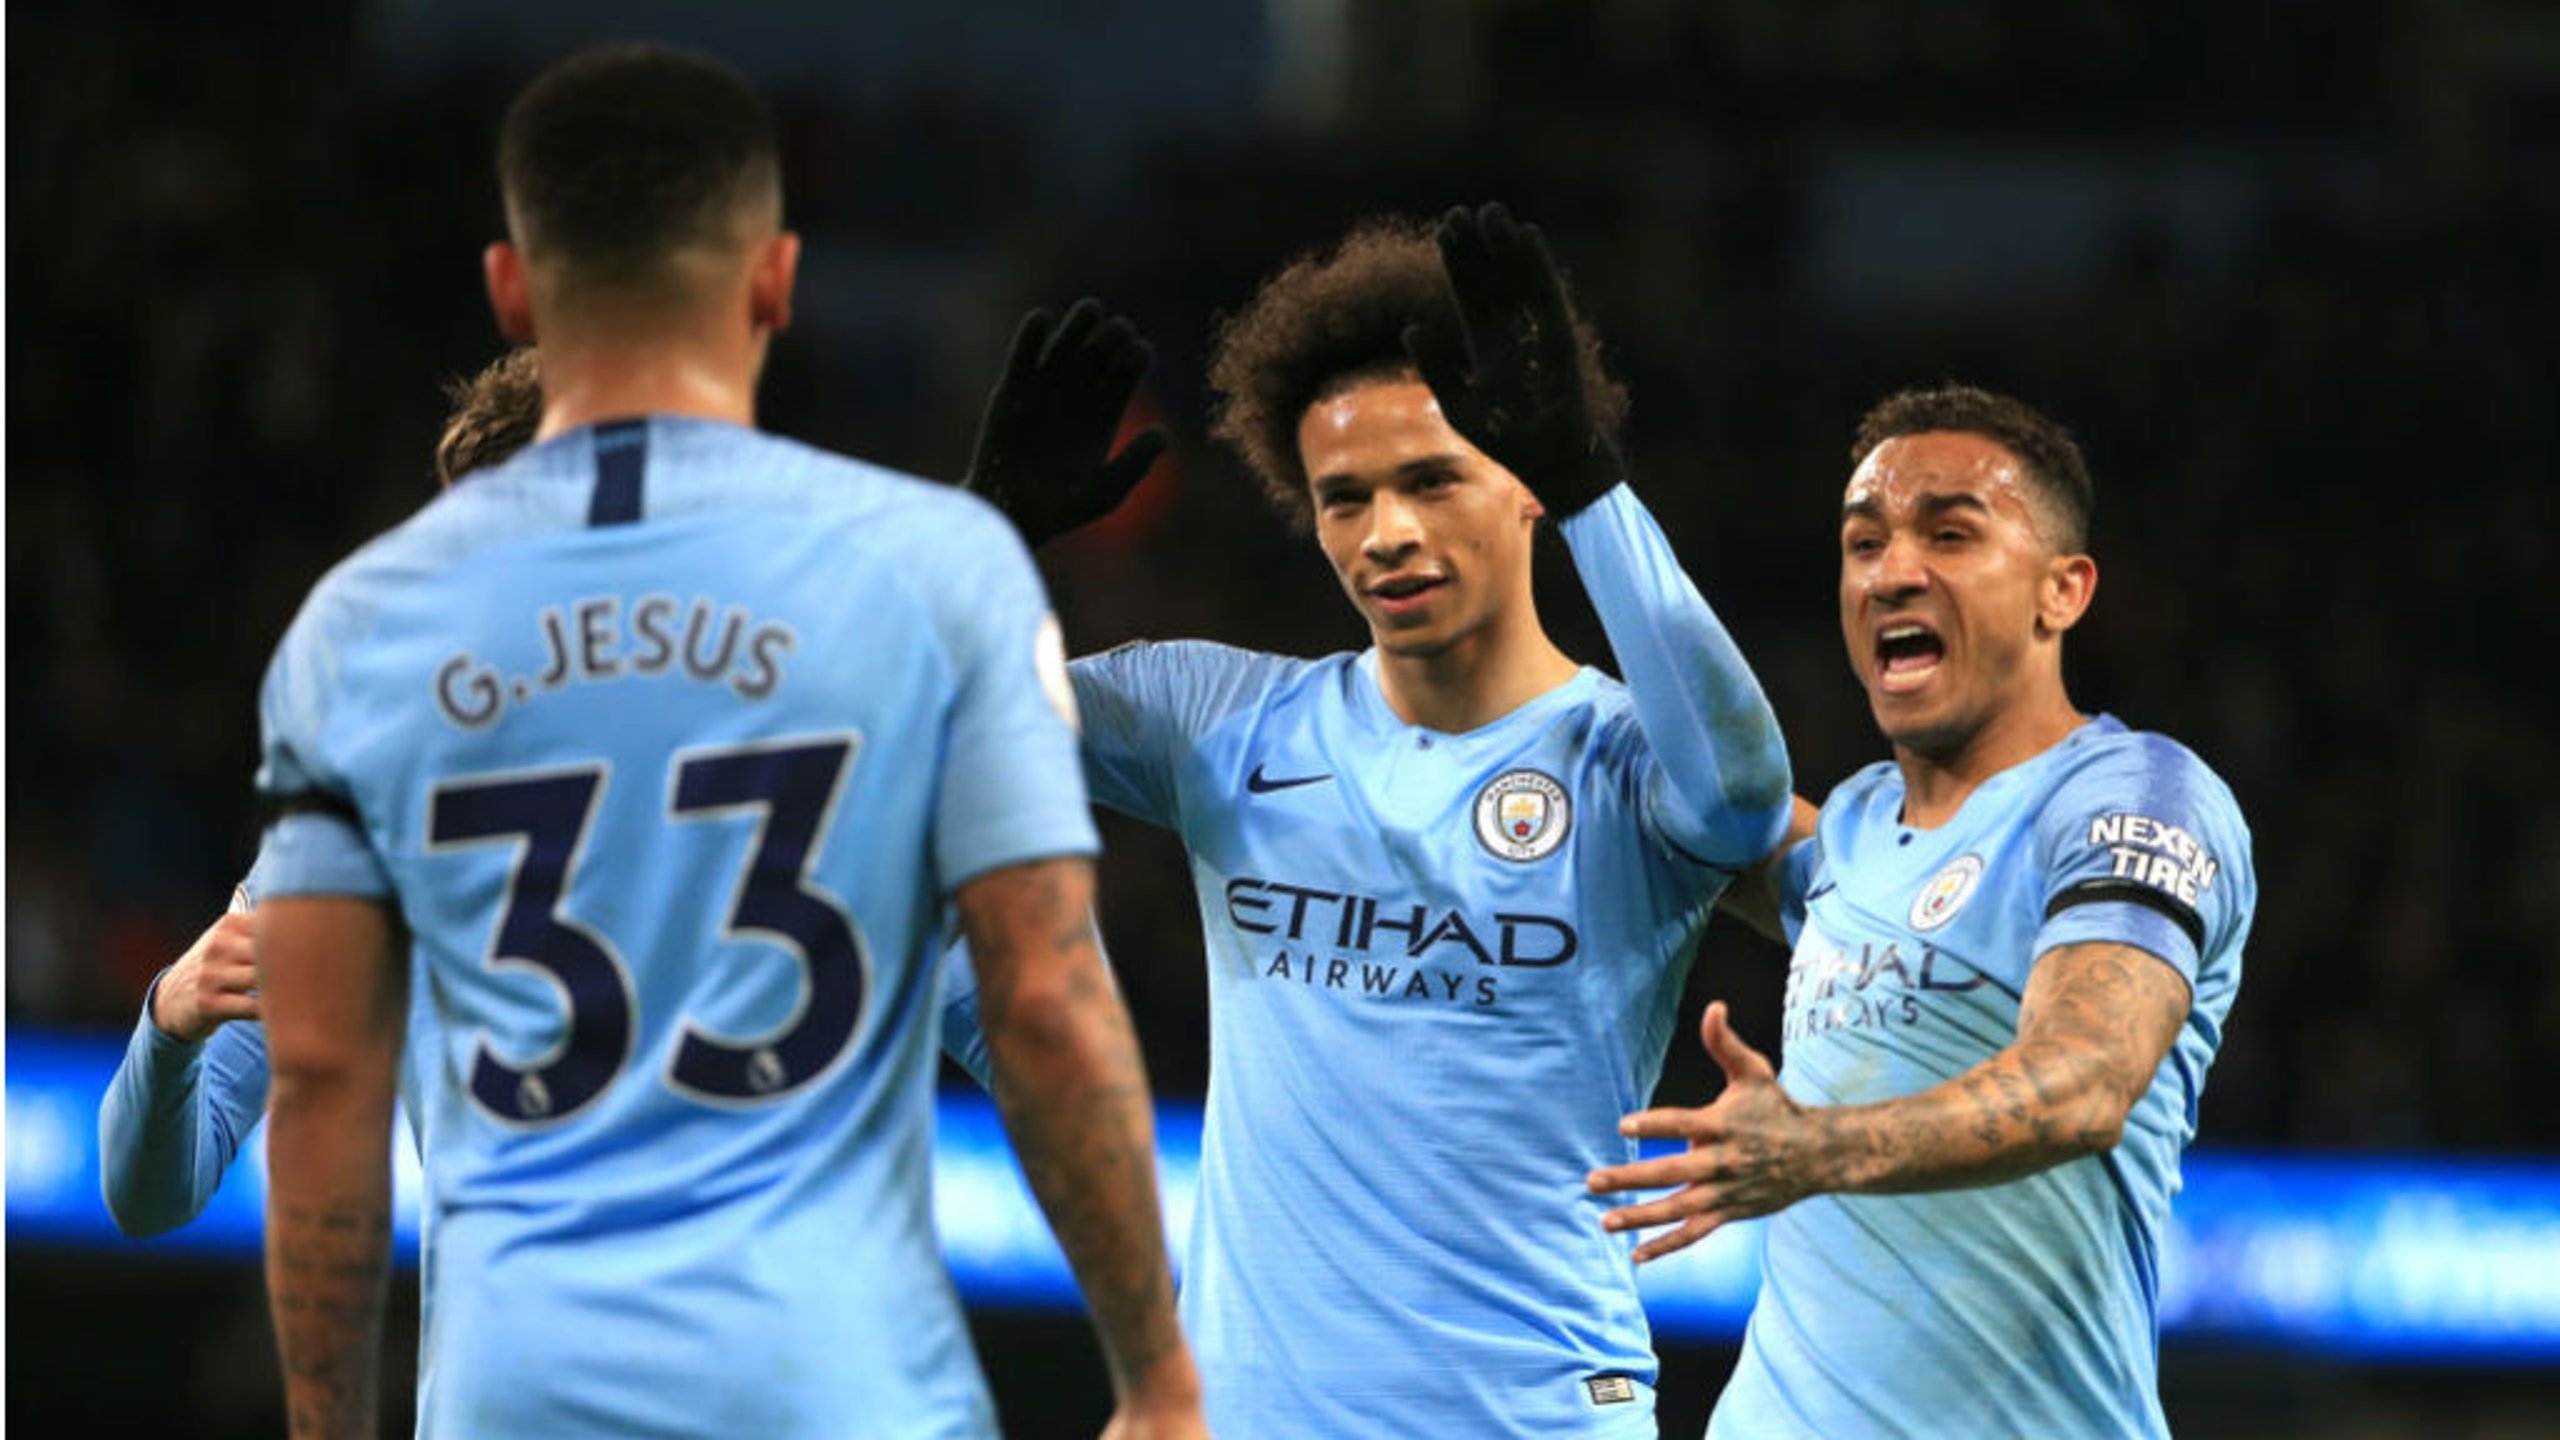 LE-THAL: Leroy Sane is all smiles after doubling City's lead with a cracking finish